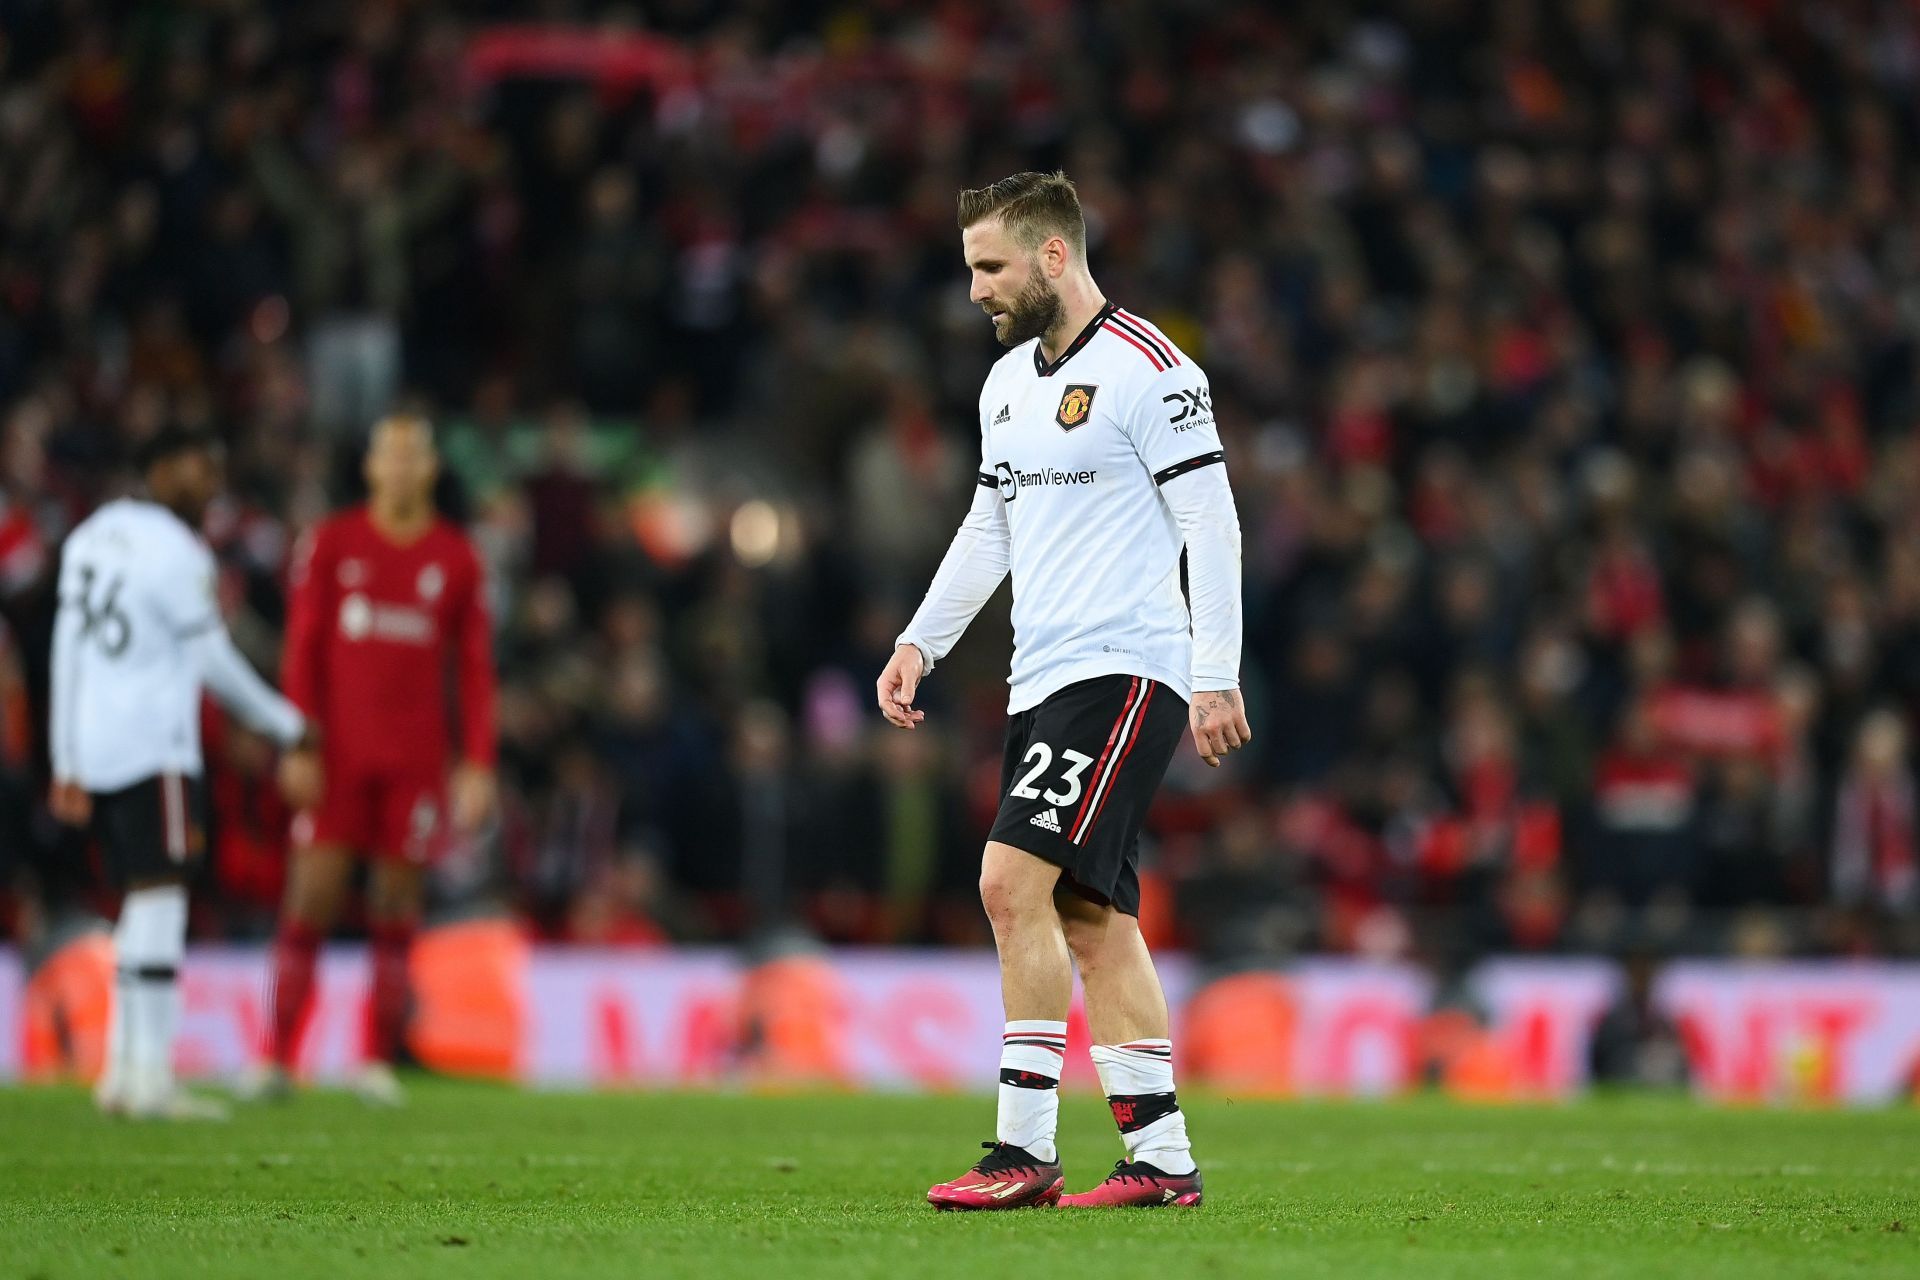 The Red Devils suffered an Anfield nightmare.